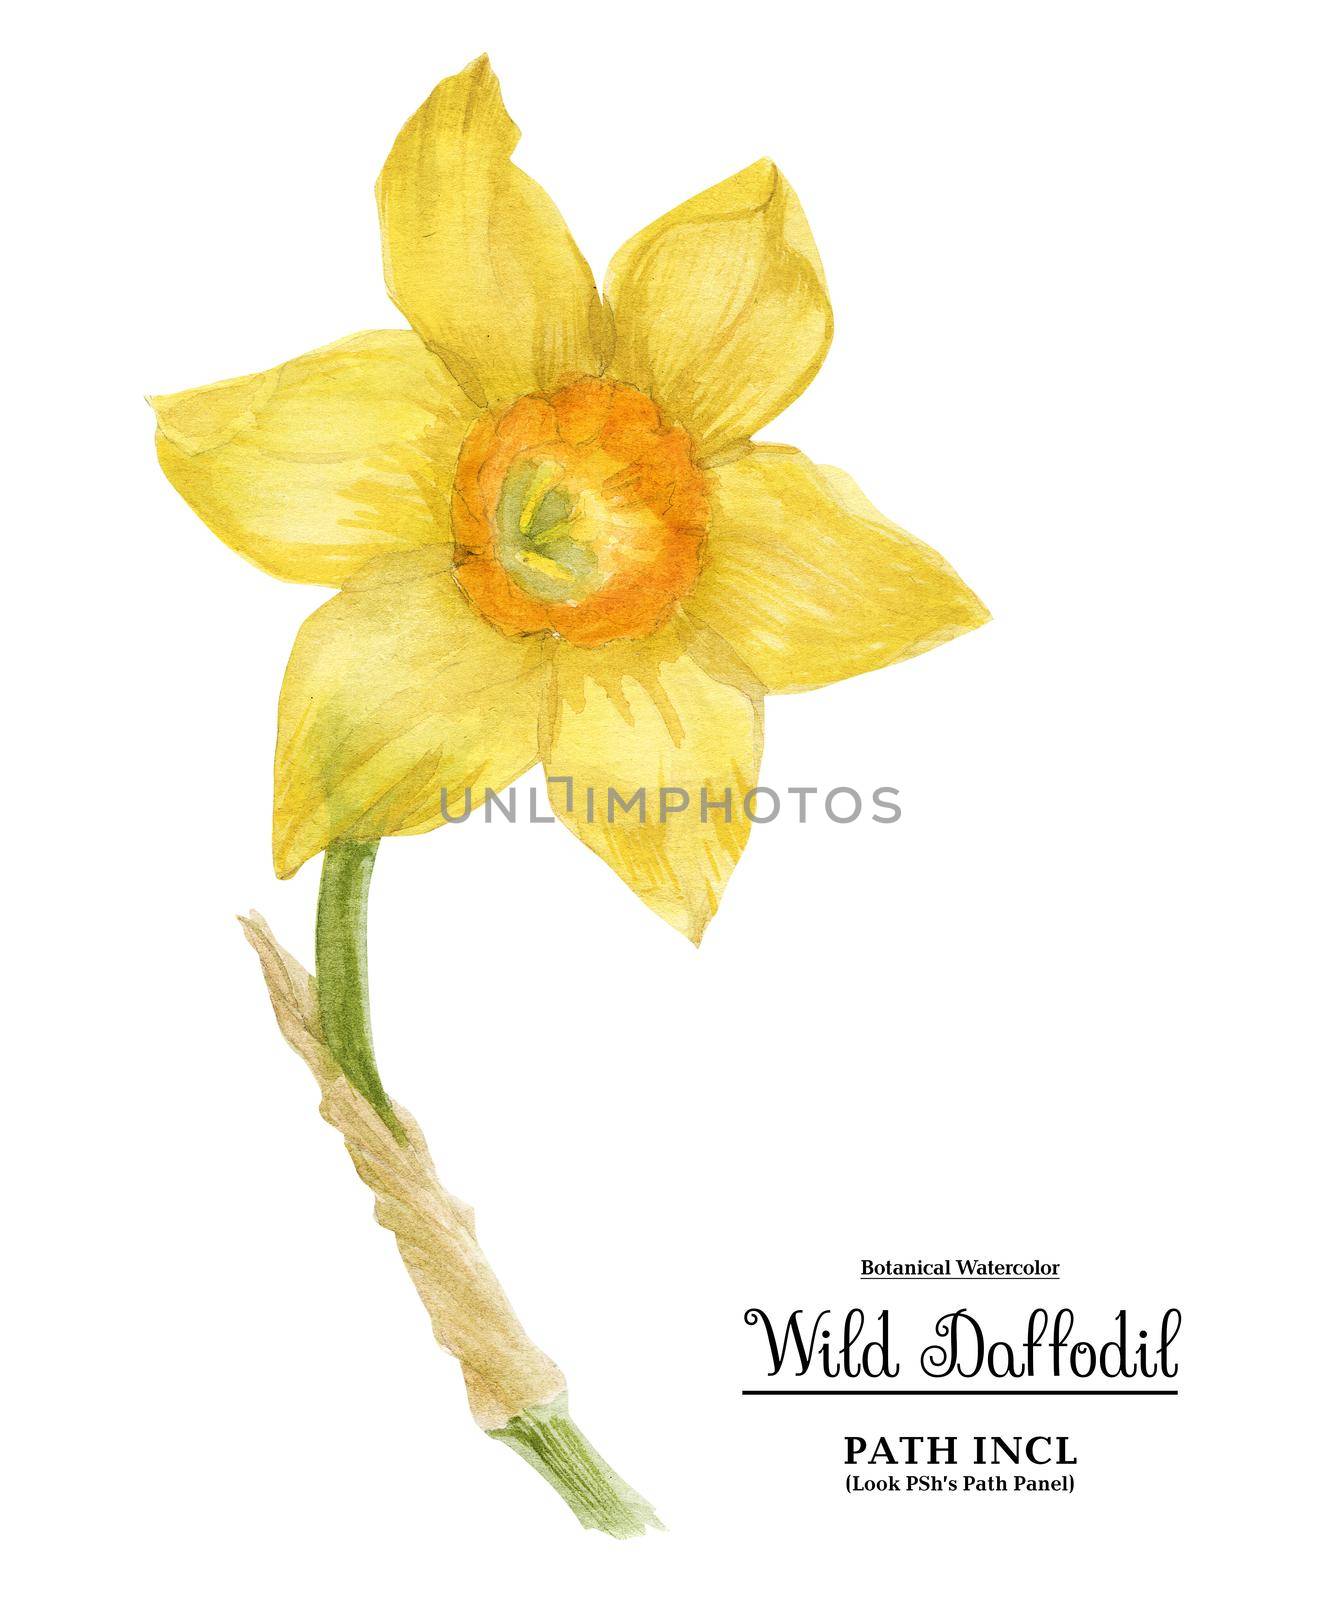 Watercolor botanical realistic illustration. Wild daffodil on a white background, path included.